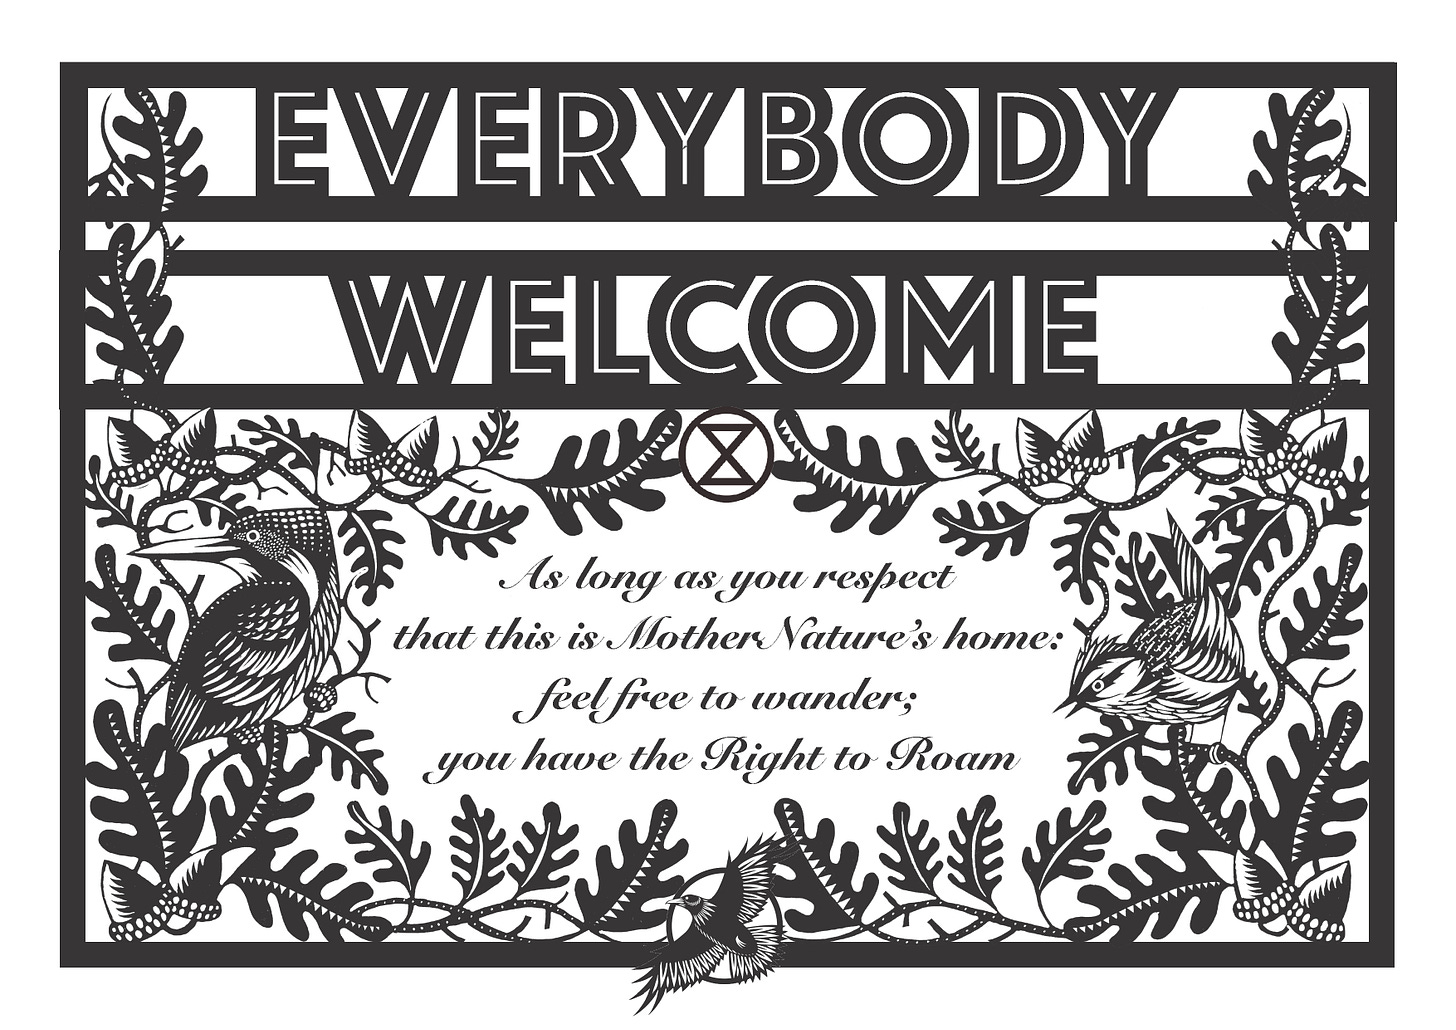 Everybody Welcome sign